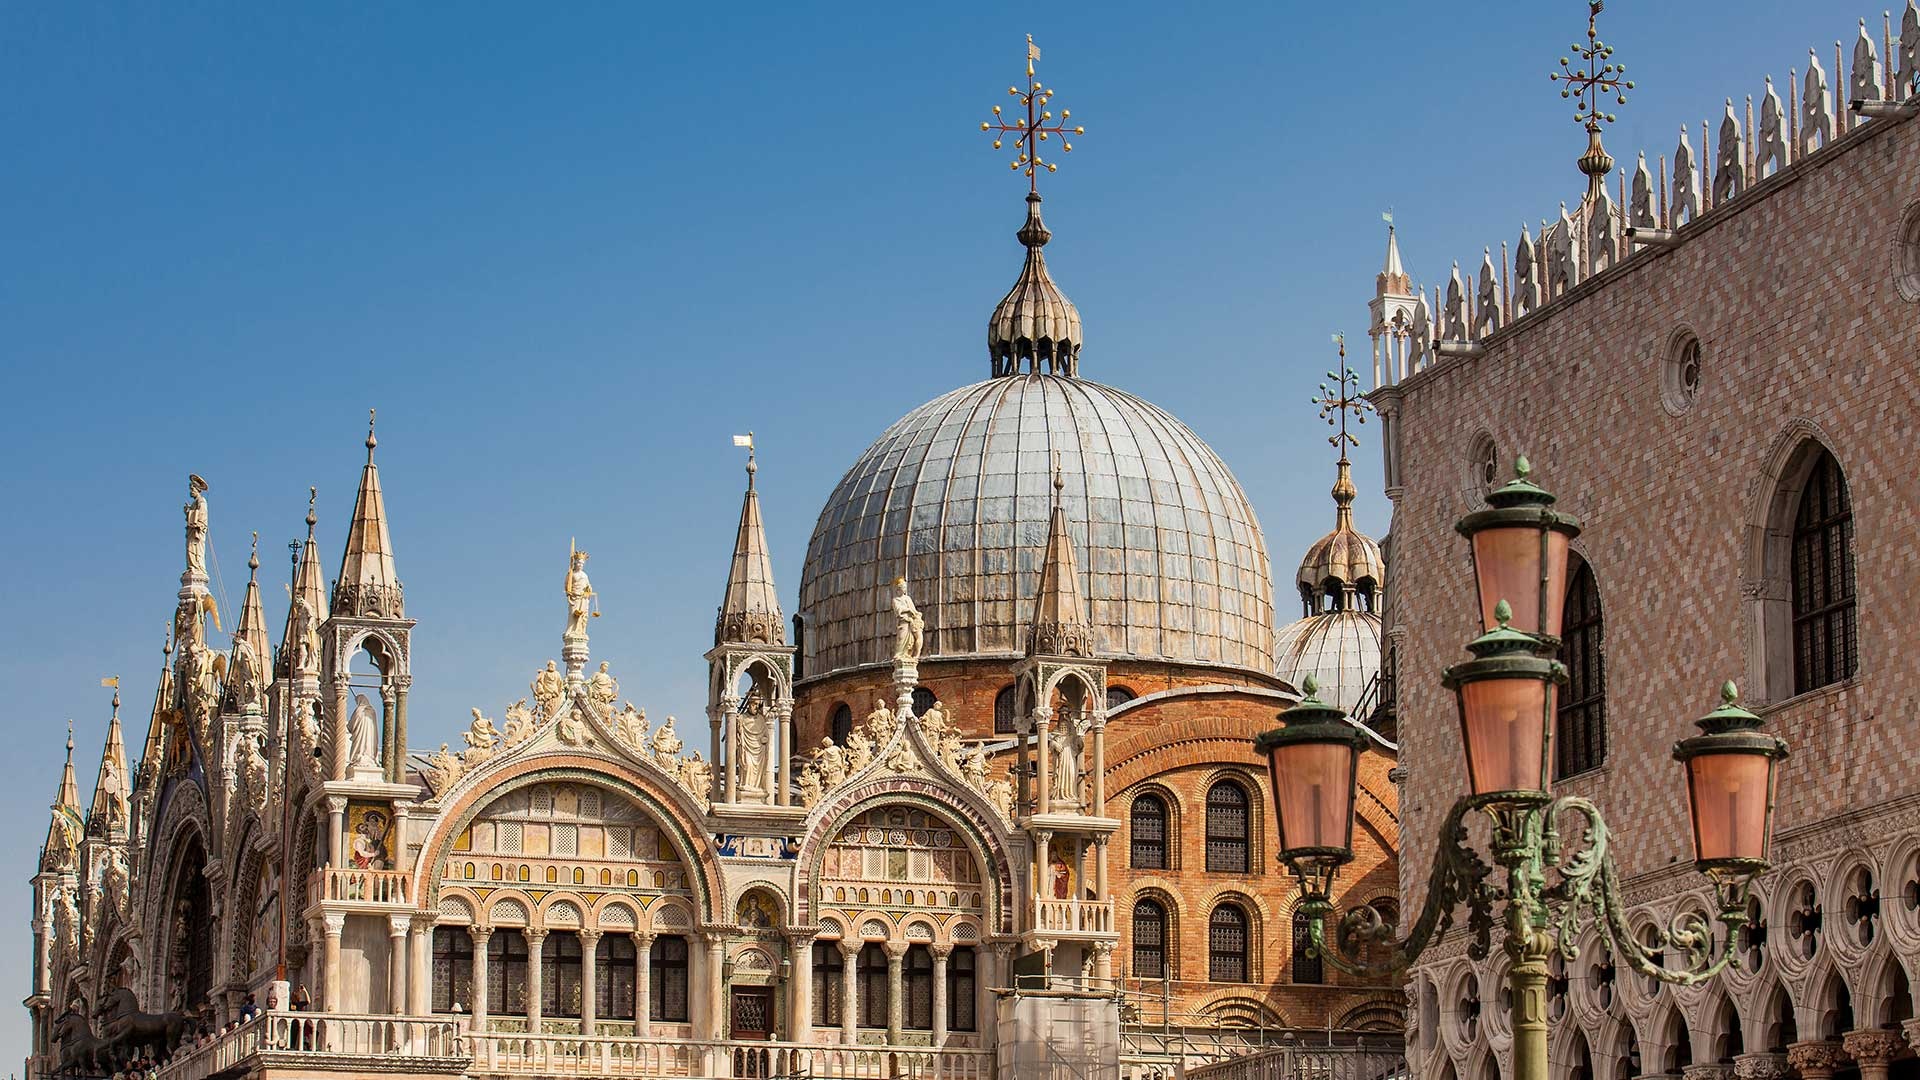 St. Mark's Basilica, Top 10 churches, Venice attractions, Another Venice, 1920x1080 Full HD Desktop